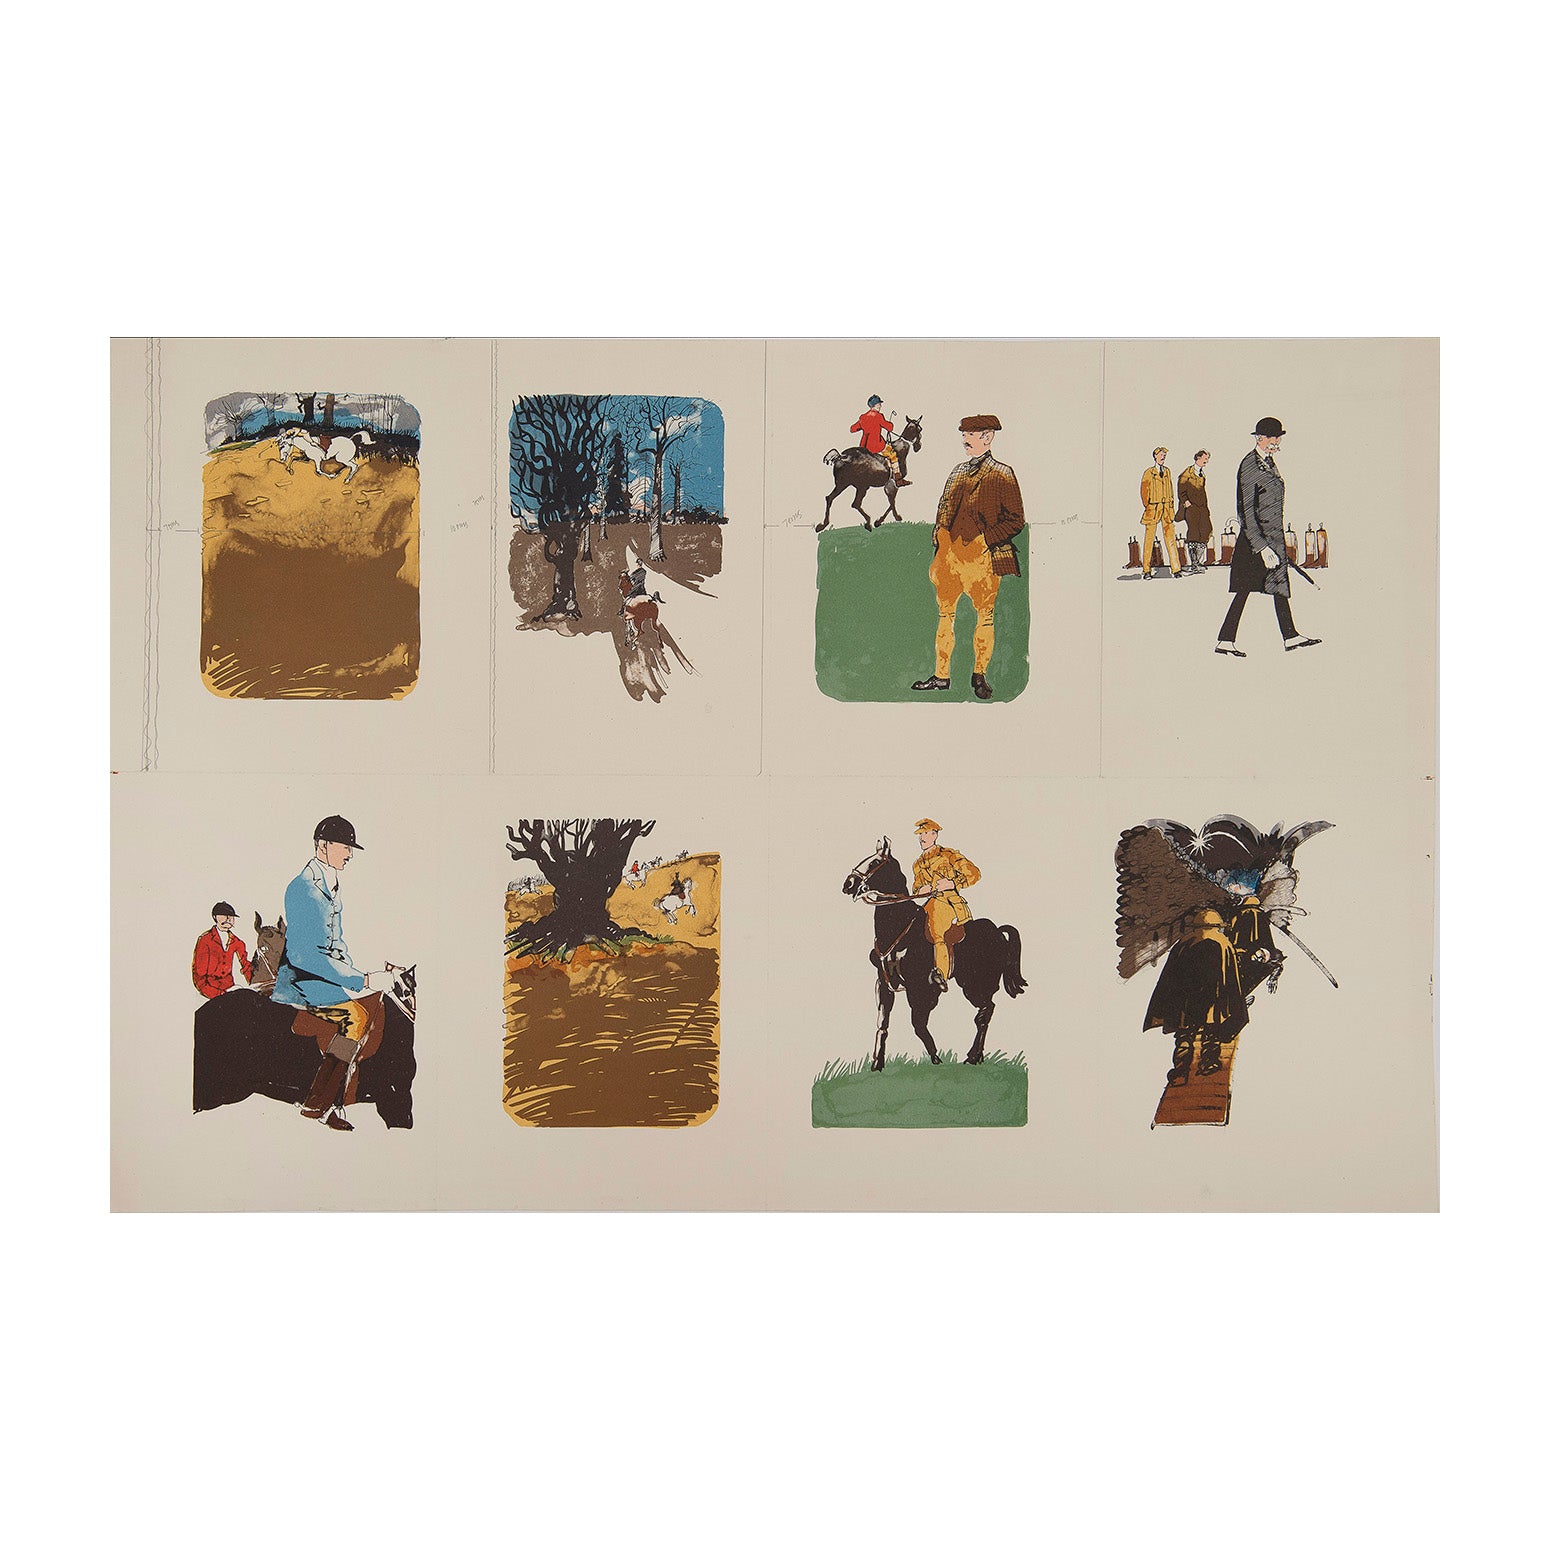 sheet of eight lithographs by Paul Hogarth RA for the 1977 Limited Editions Club edition of Memoirs of a Foxhunting Man (Siegfried Sassoon, 1928), printed by the Curwen Press. Superb set of illustrations reflecting Sassoon’s journey from pre-First World War country gent to military service and the trenches of France & Flander